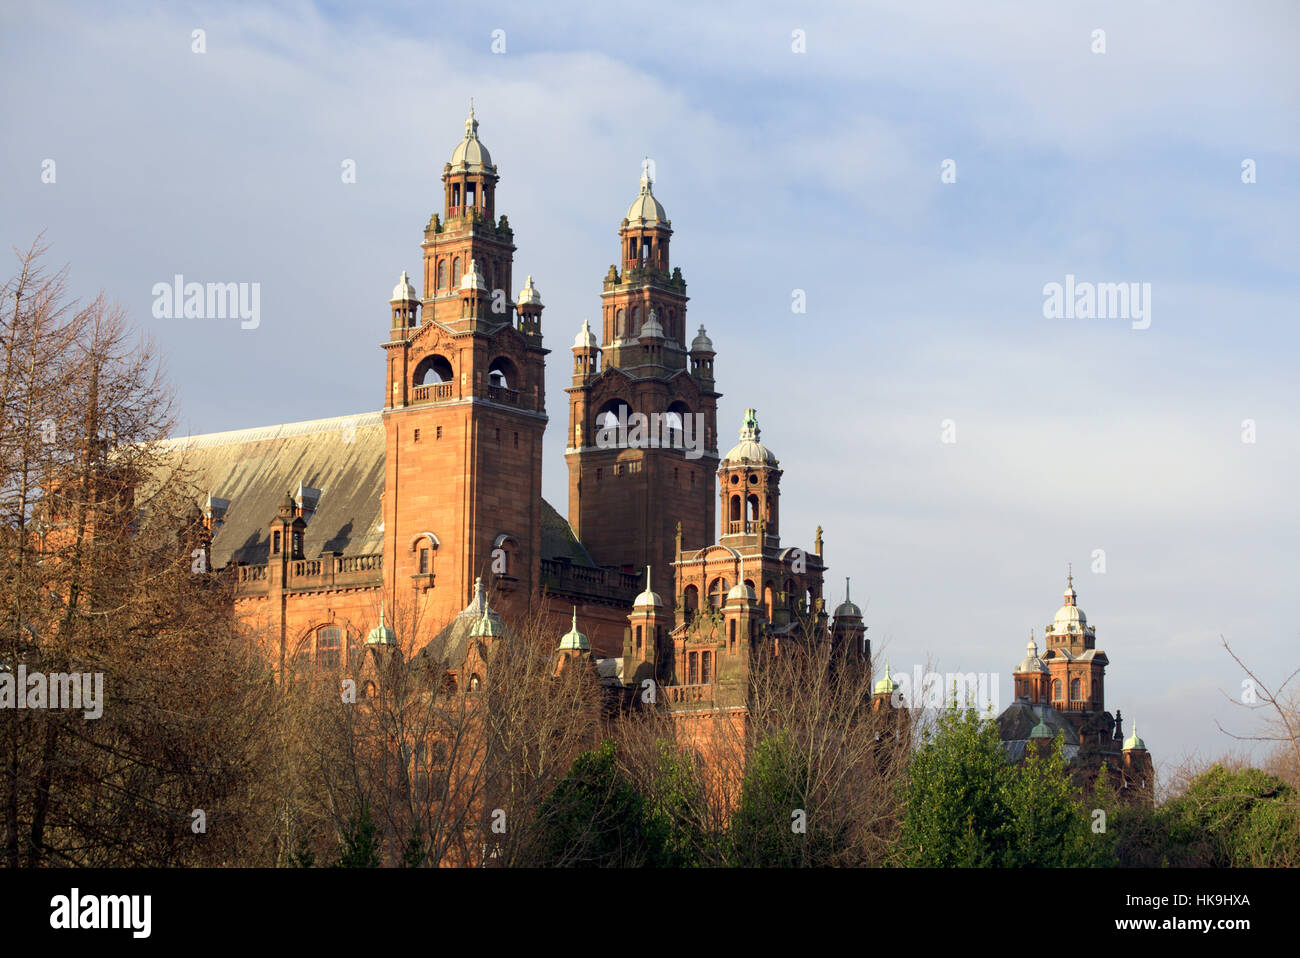 Glasgow Kelvingrove  park  art galleries museum which contains both the university and the museum in the Park area Stock Photo